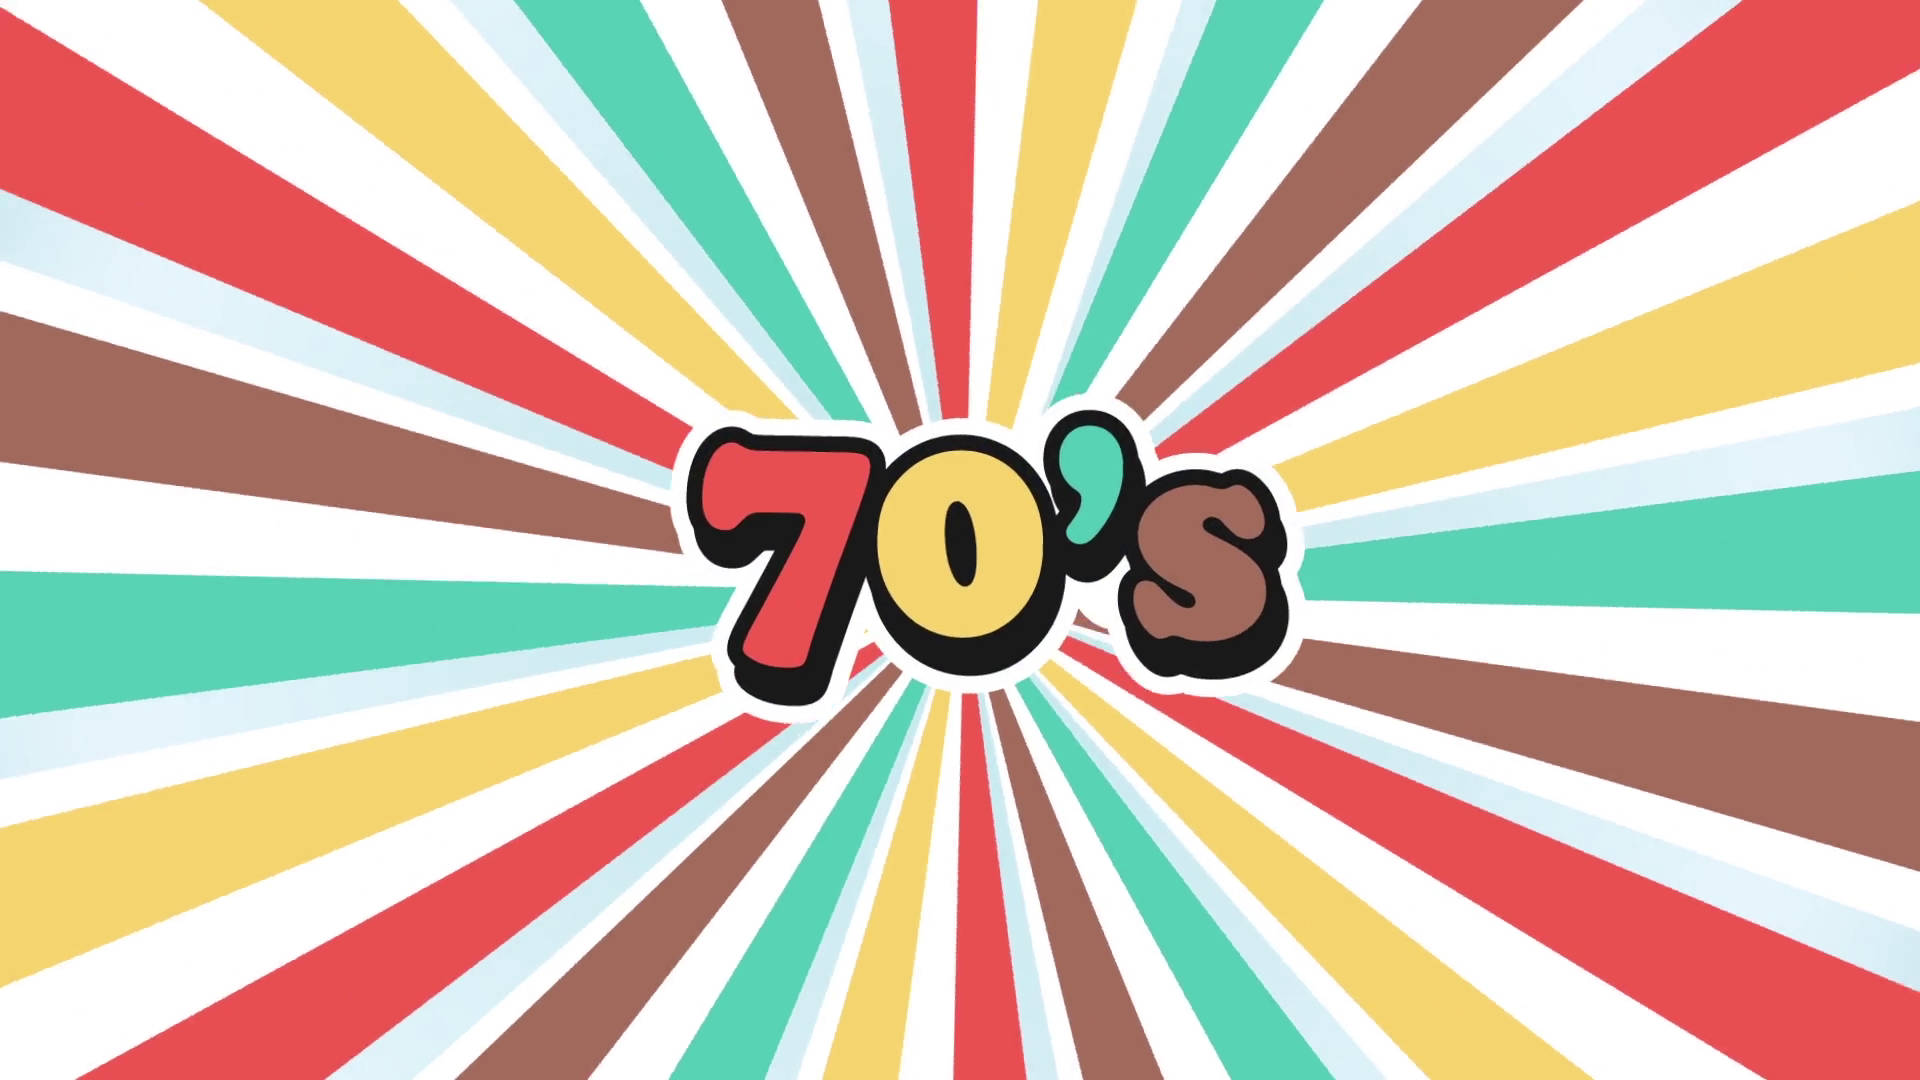 Free 70s Wallpaper Downloads, [200+] 70s Wallpapers for FREE | Wallpapers .com